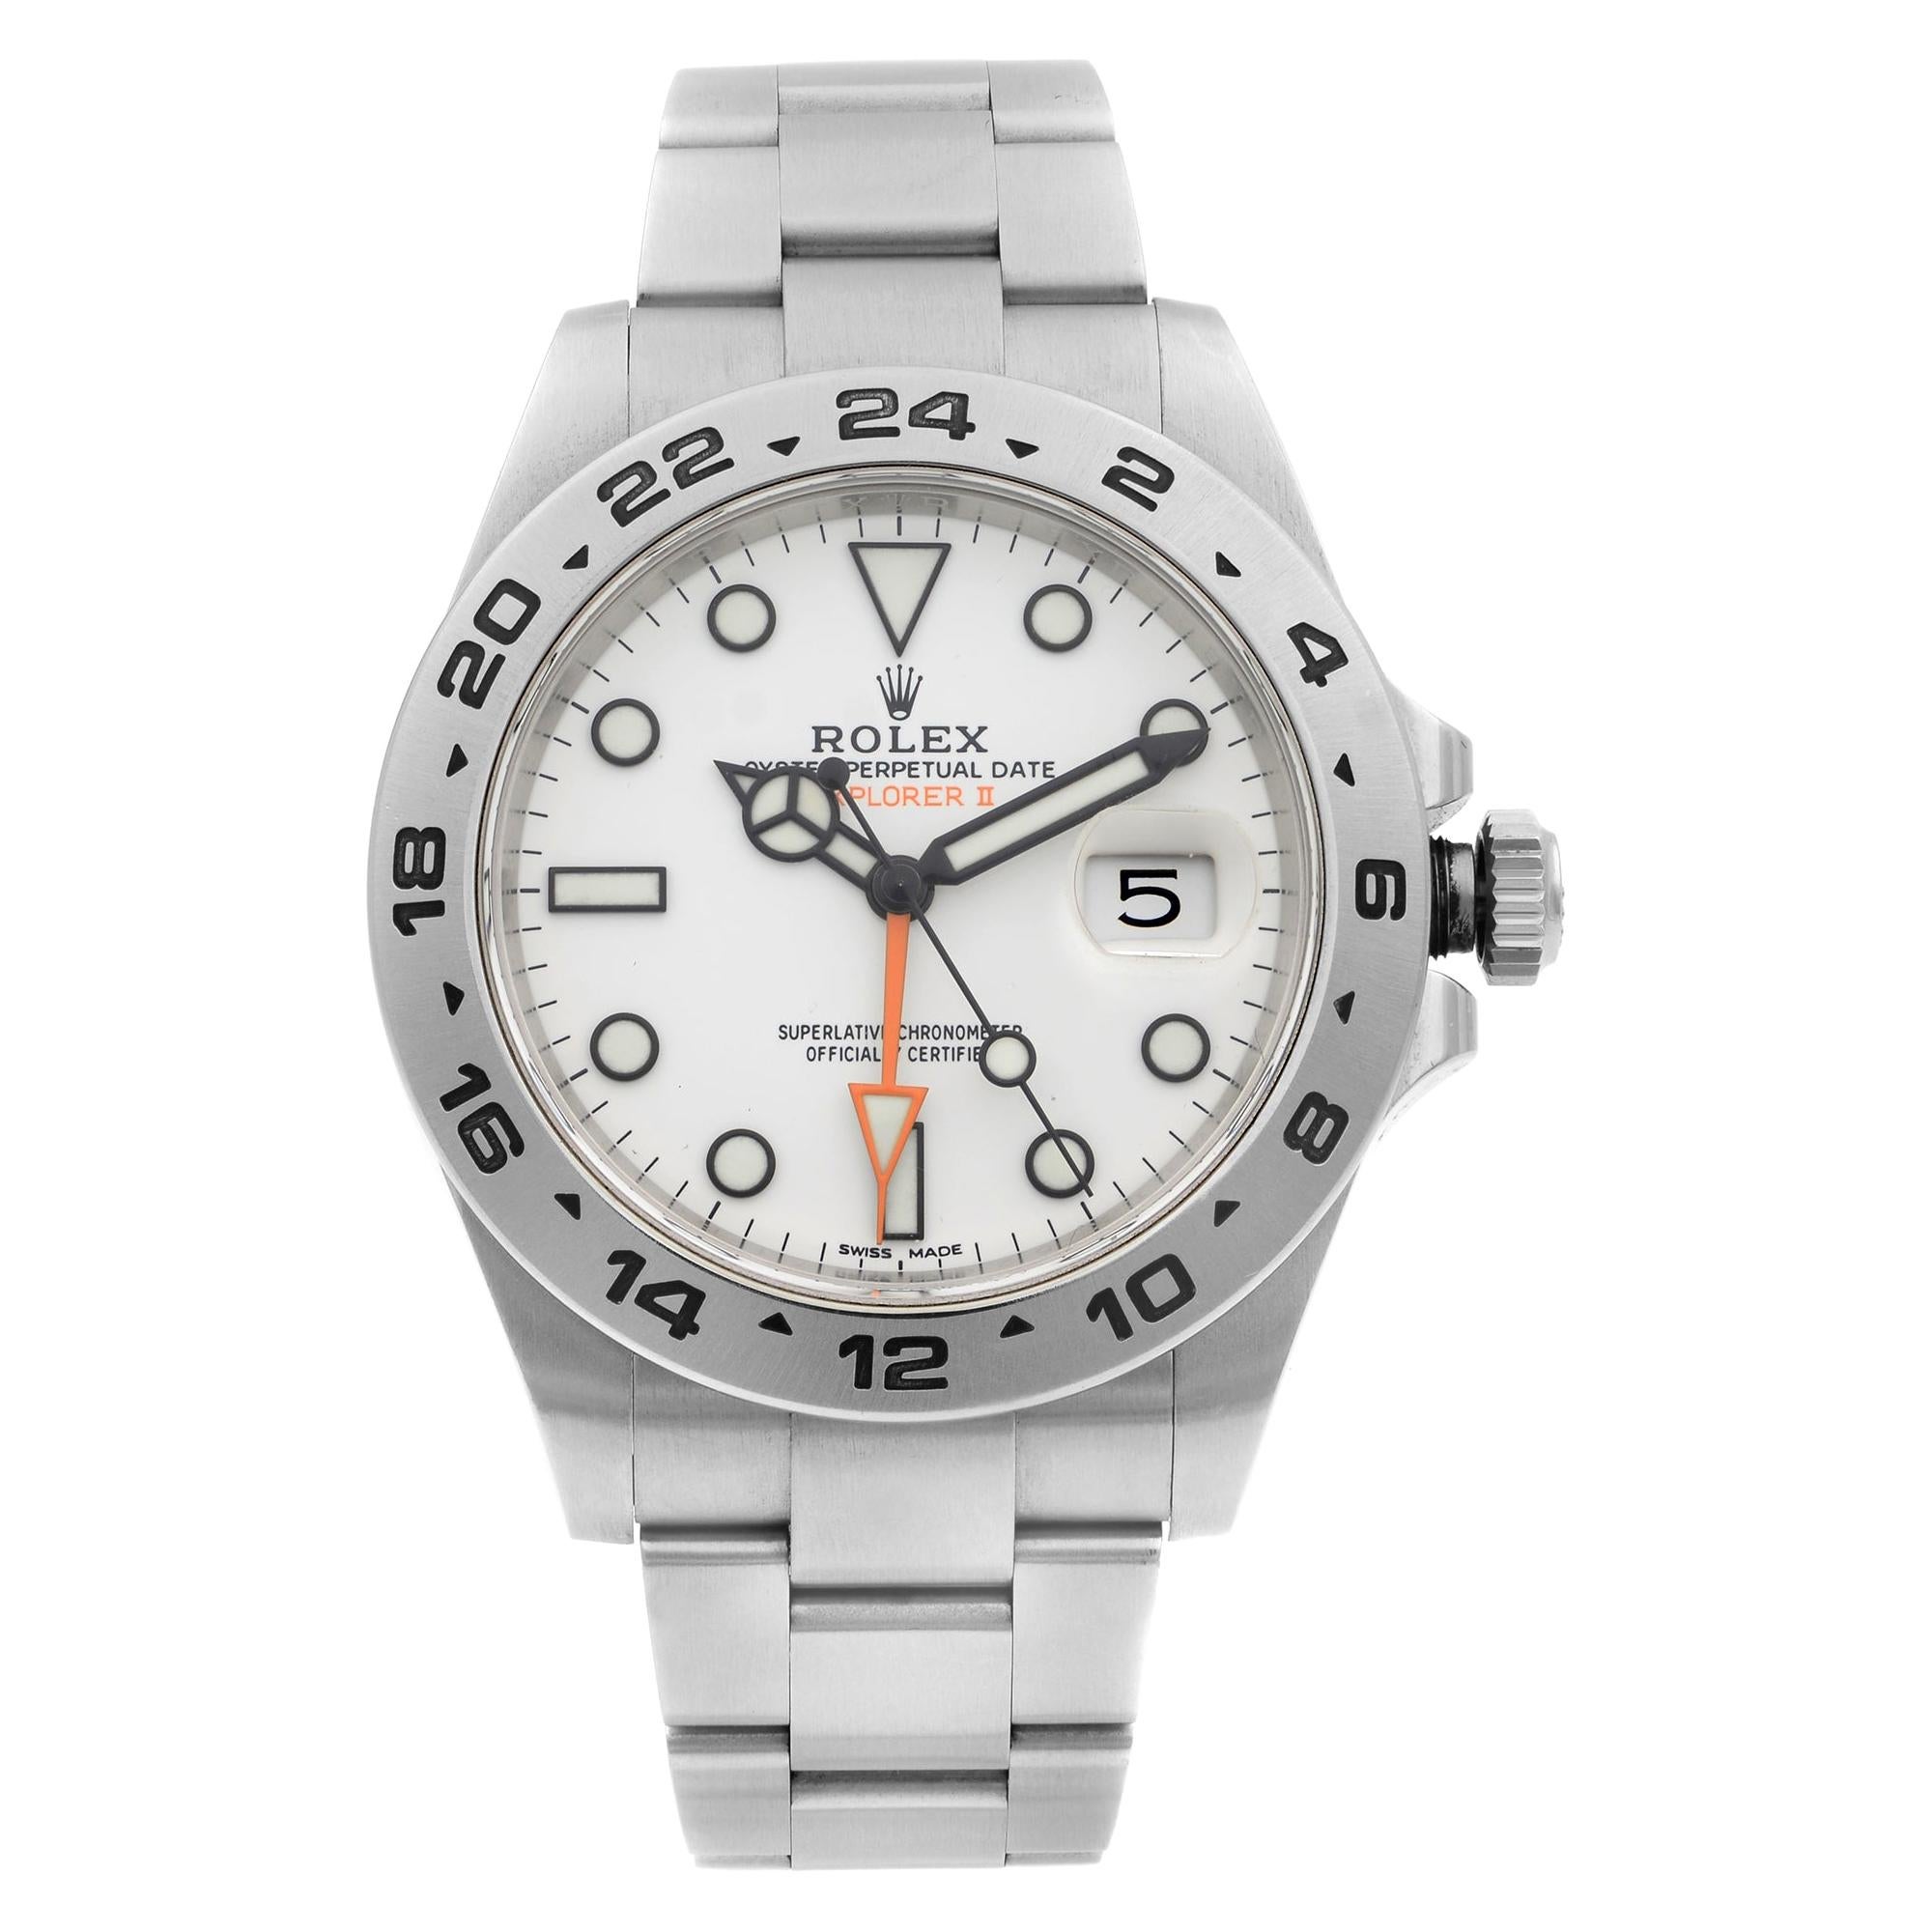 Rolex Explorer II GMT Stainless Steel White Dial Automatic Men's Watch 216570